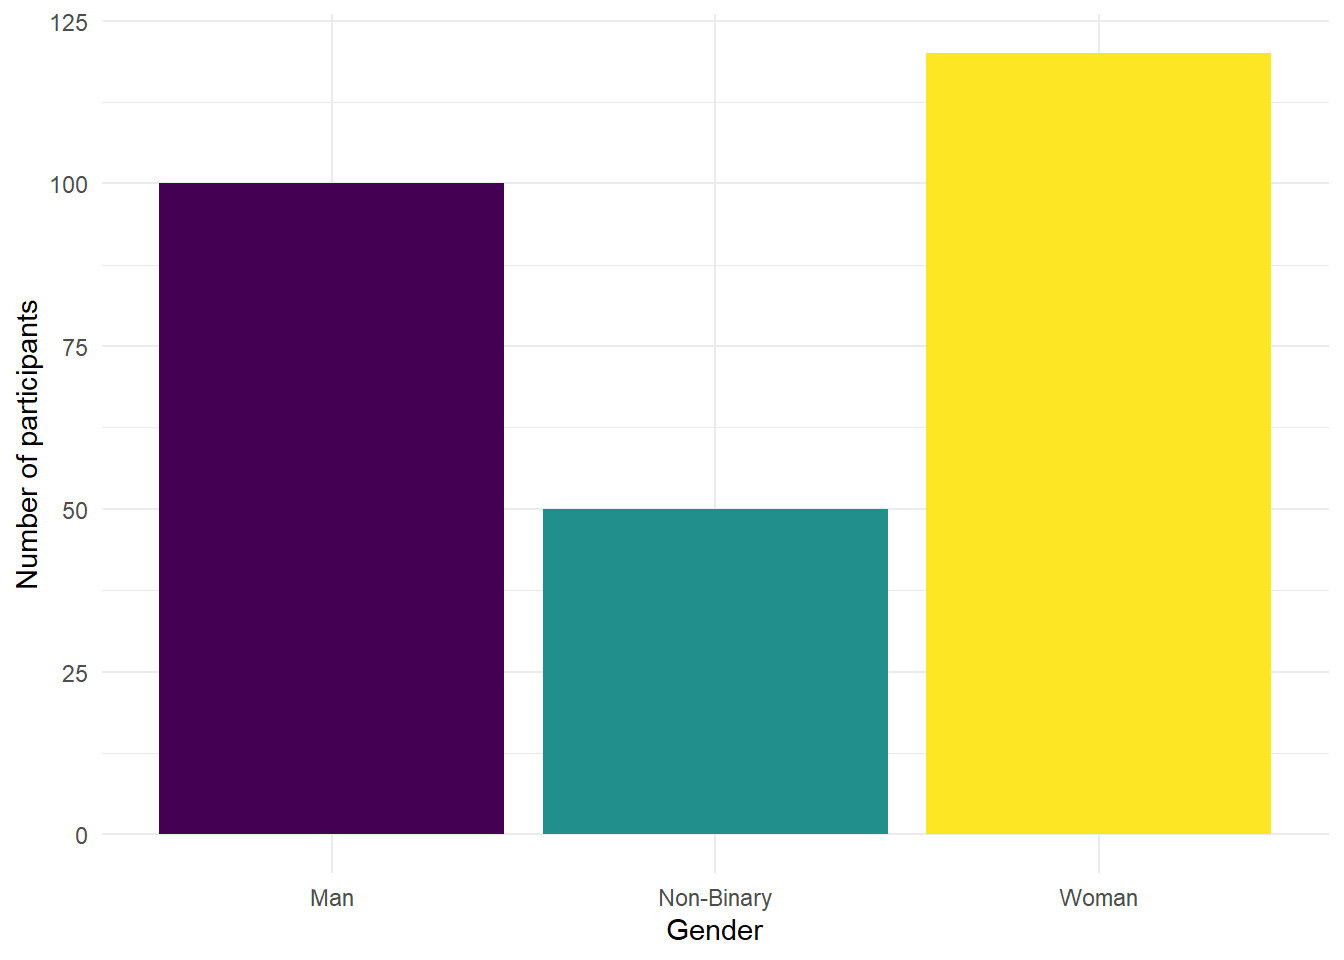 Number of participants by gender